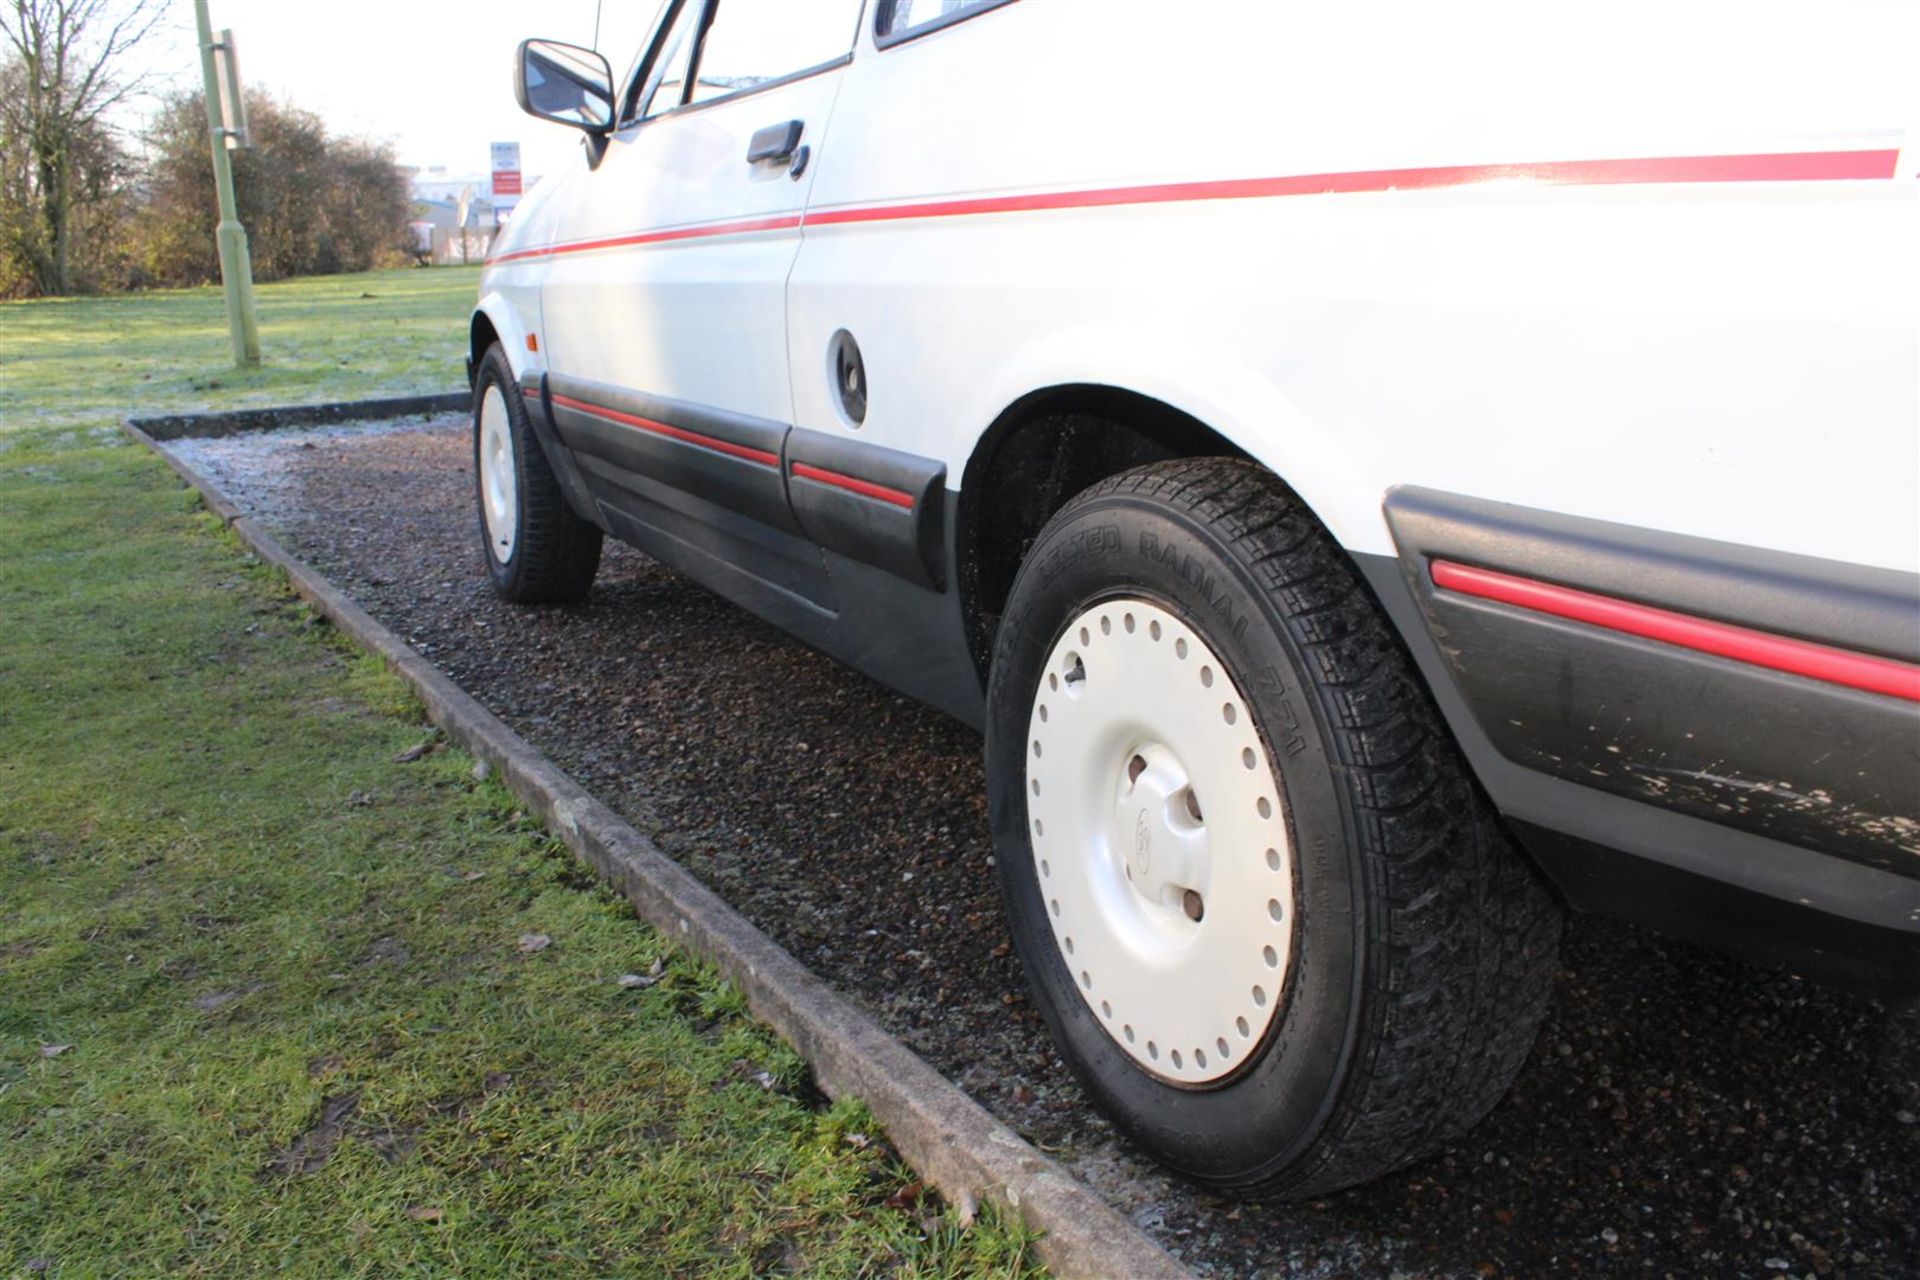 1987 Ford Fiesta 1.4 S Mk2 - Image 24 of 29